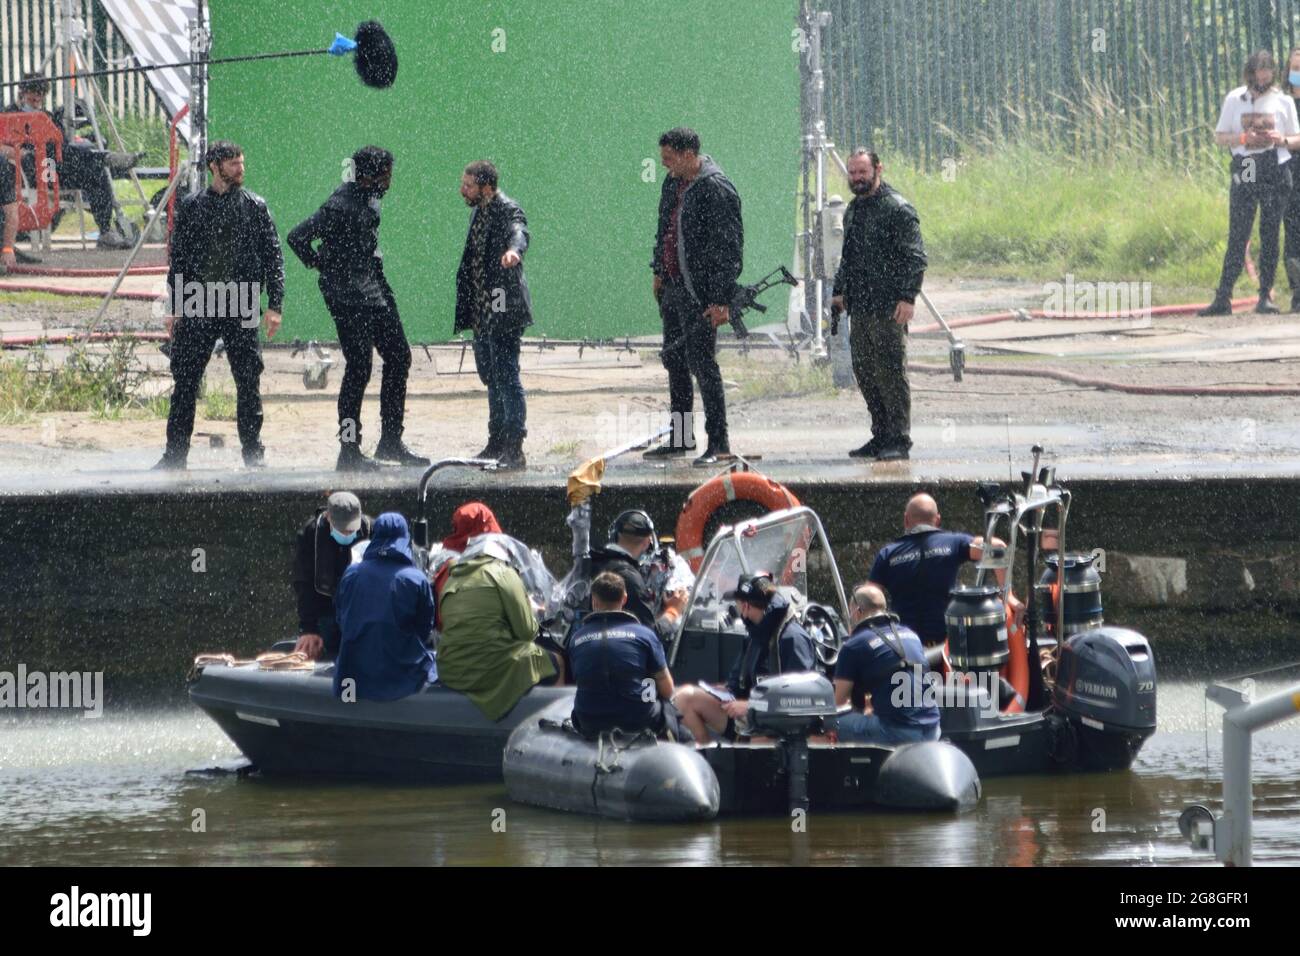 Filming of a scene from Gangs of London season 2 Stock Photo